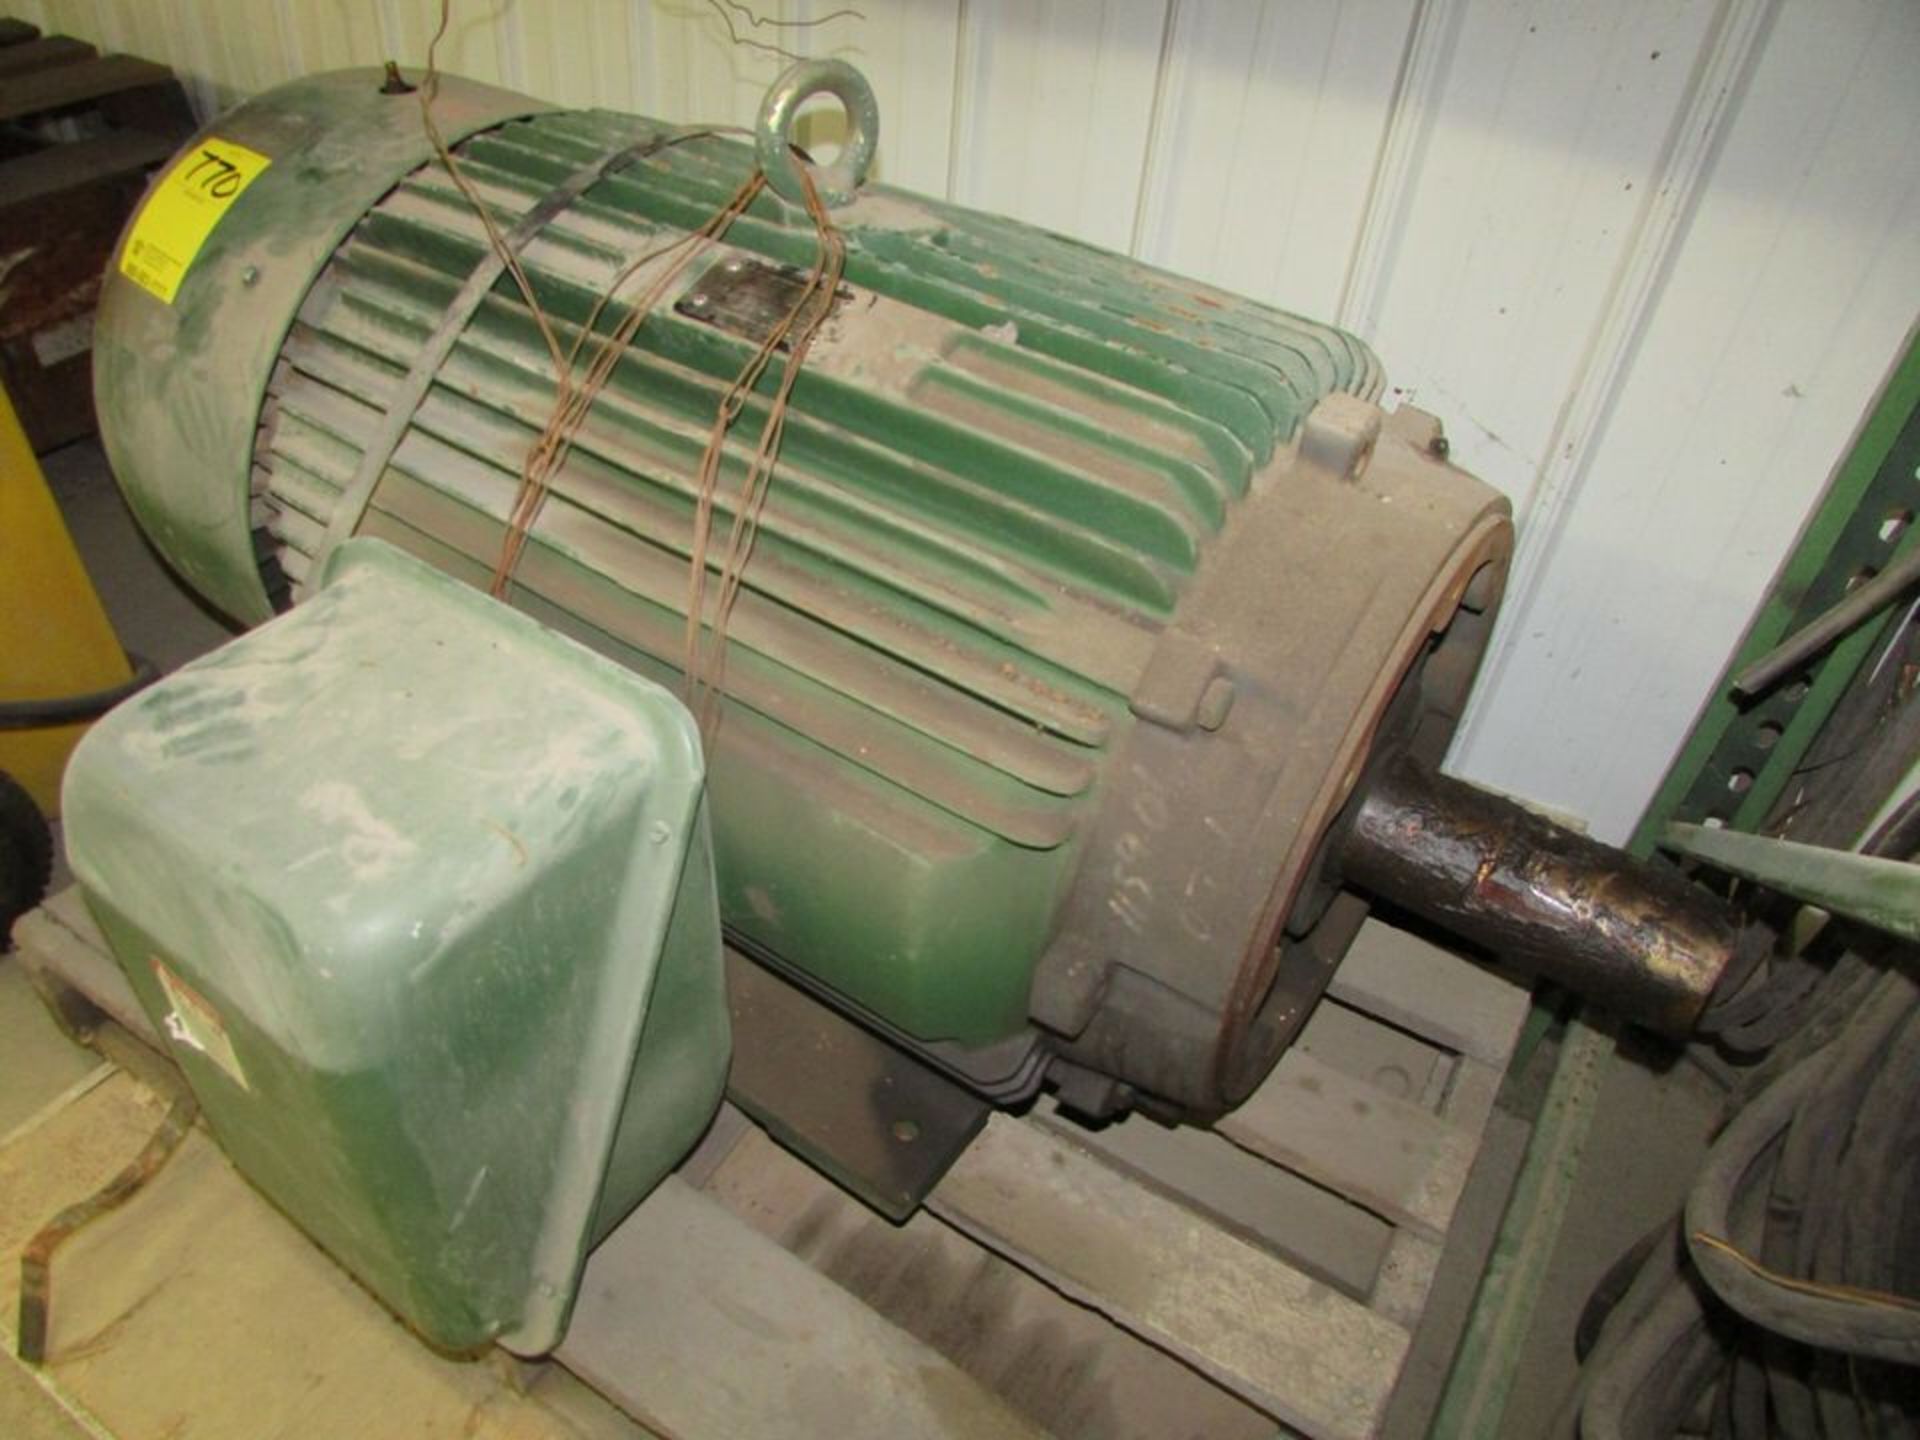 Toshiba 100HP 3-Phase Electric Motor, 444T Frame, Continuous Duty Rated, 1185RPM, 230/460V 246/ - Image 3 of 4